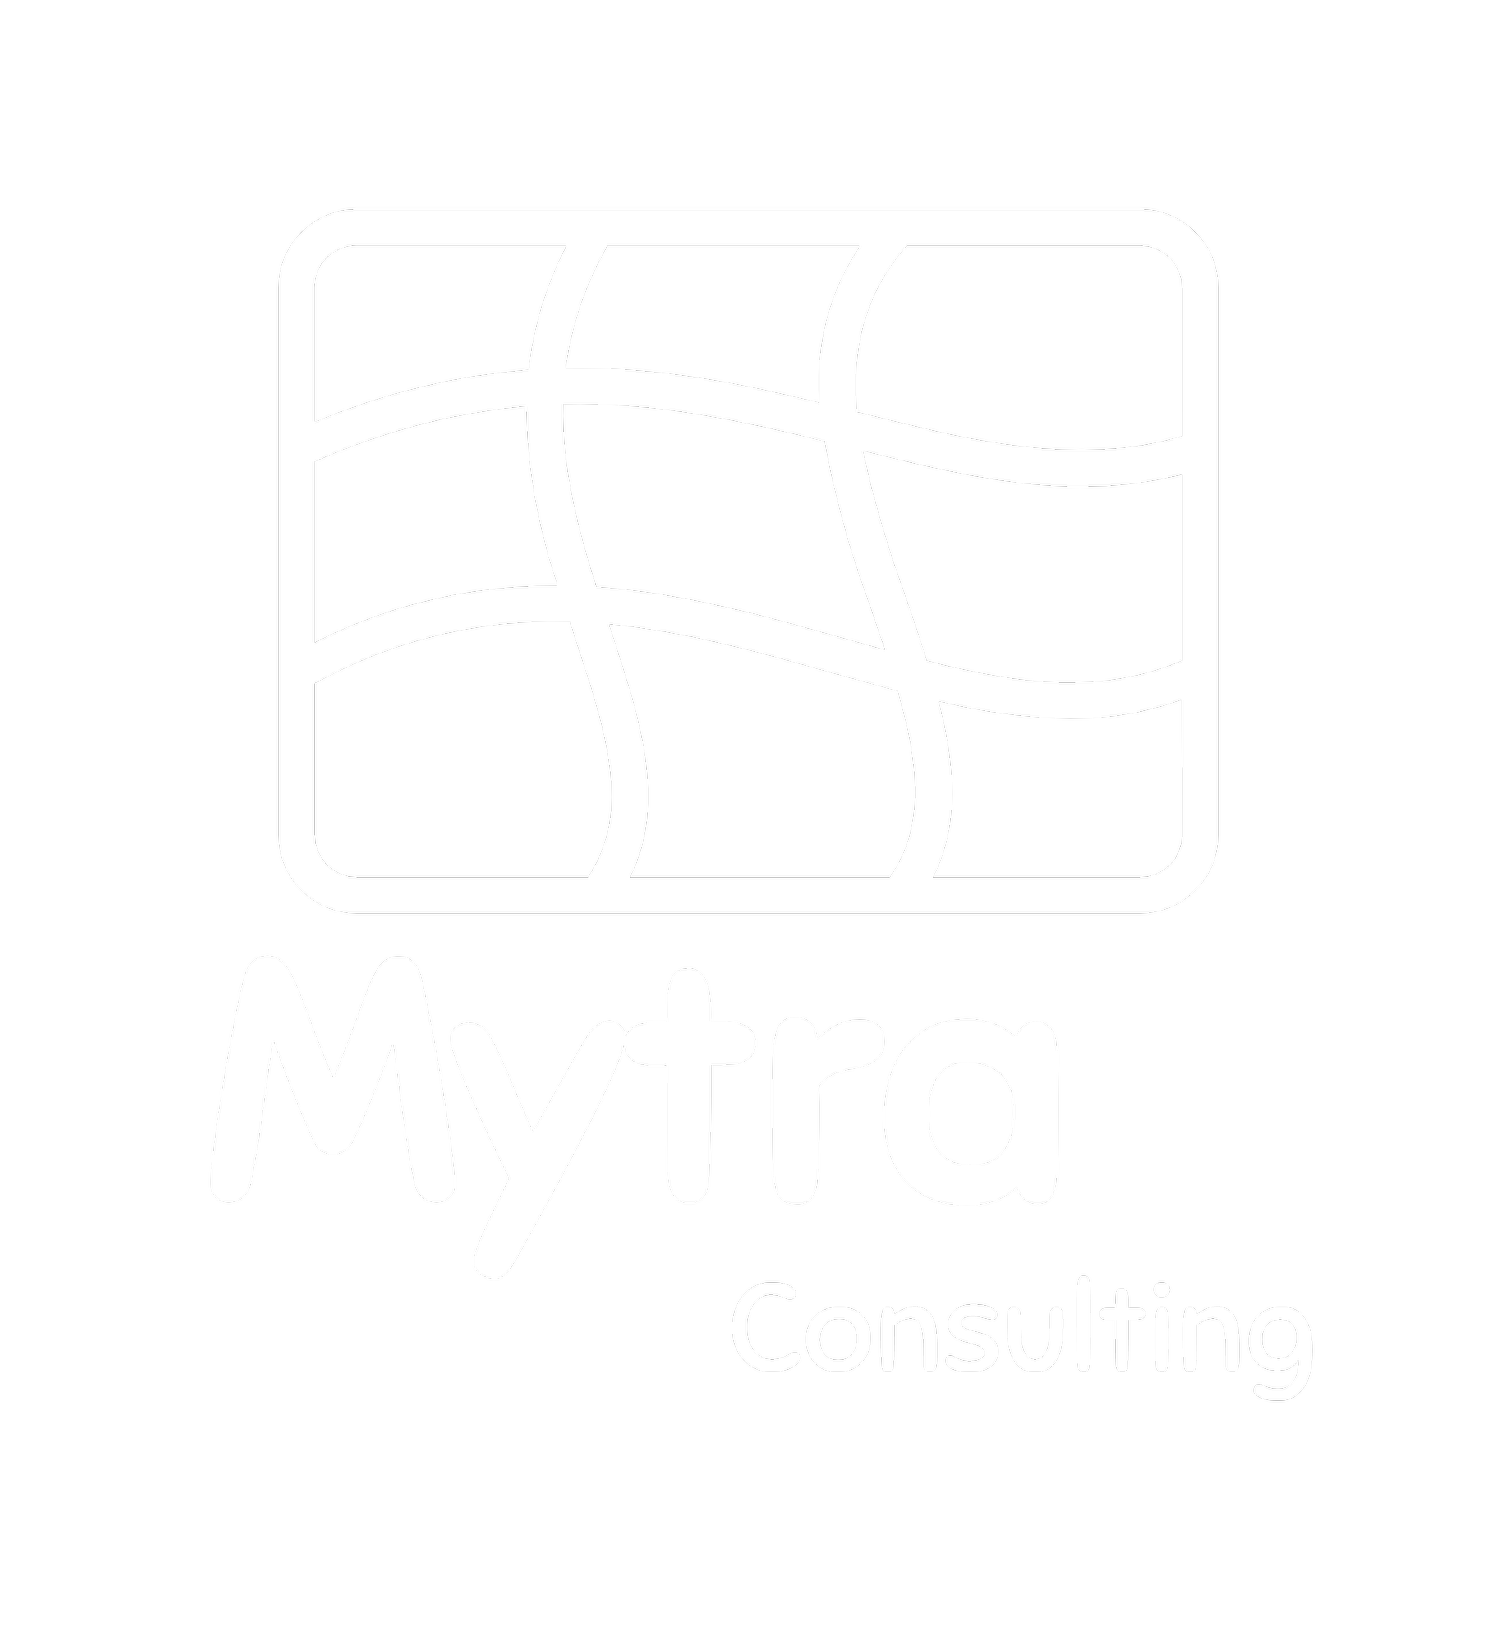 Mytra Consulting